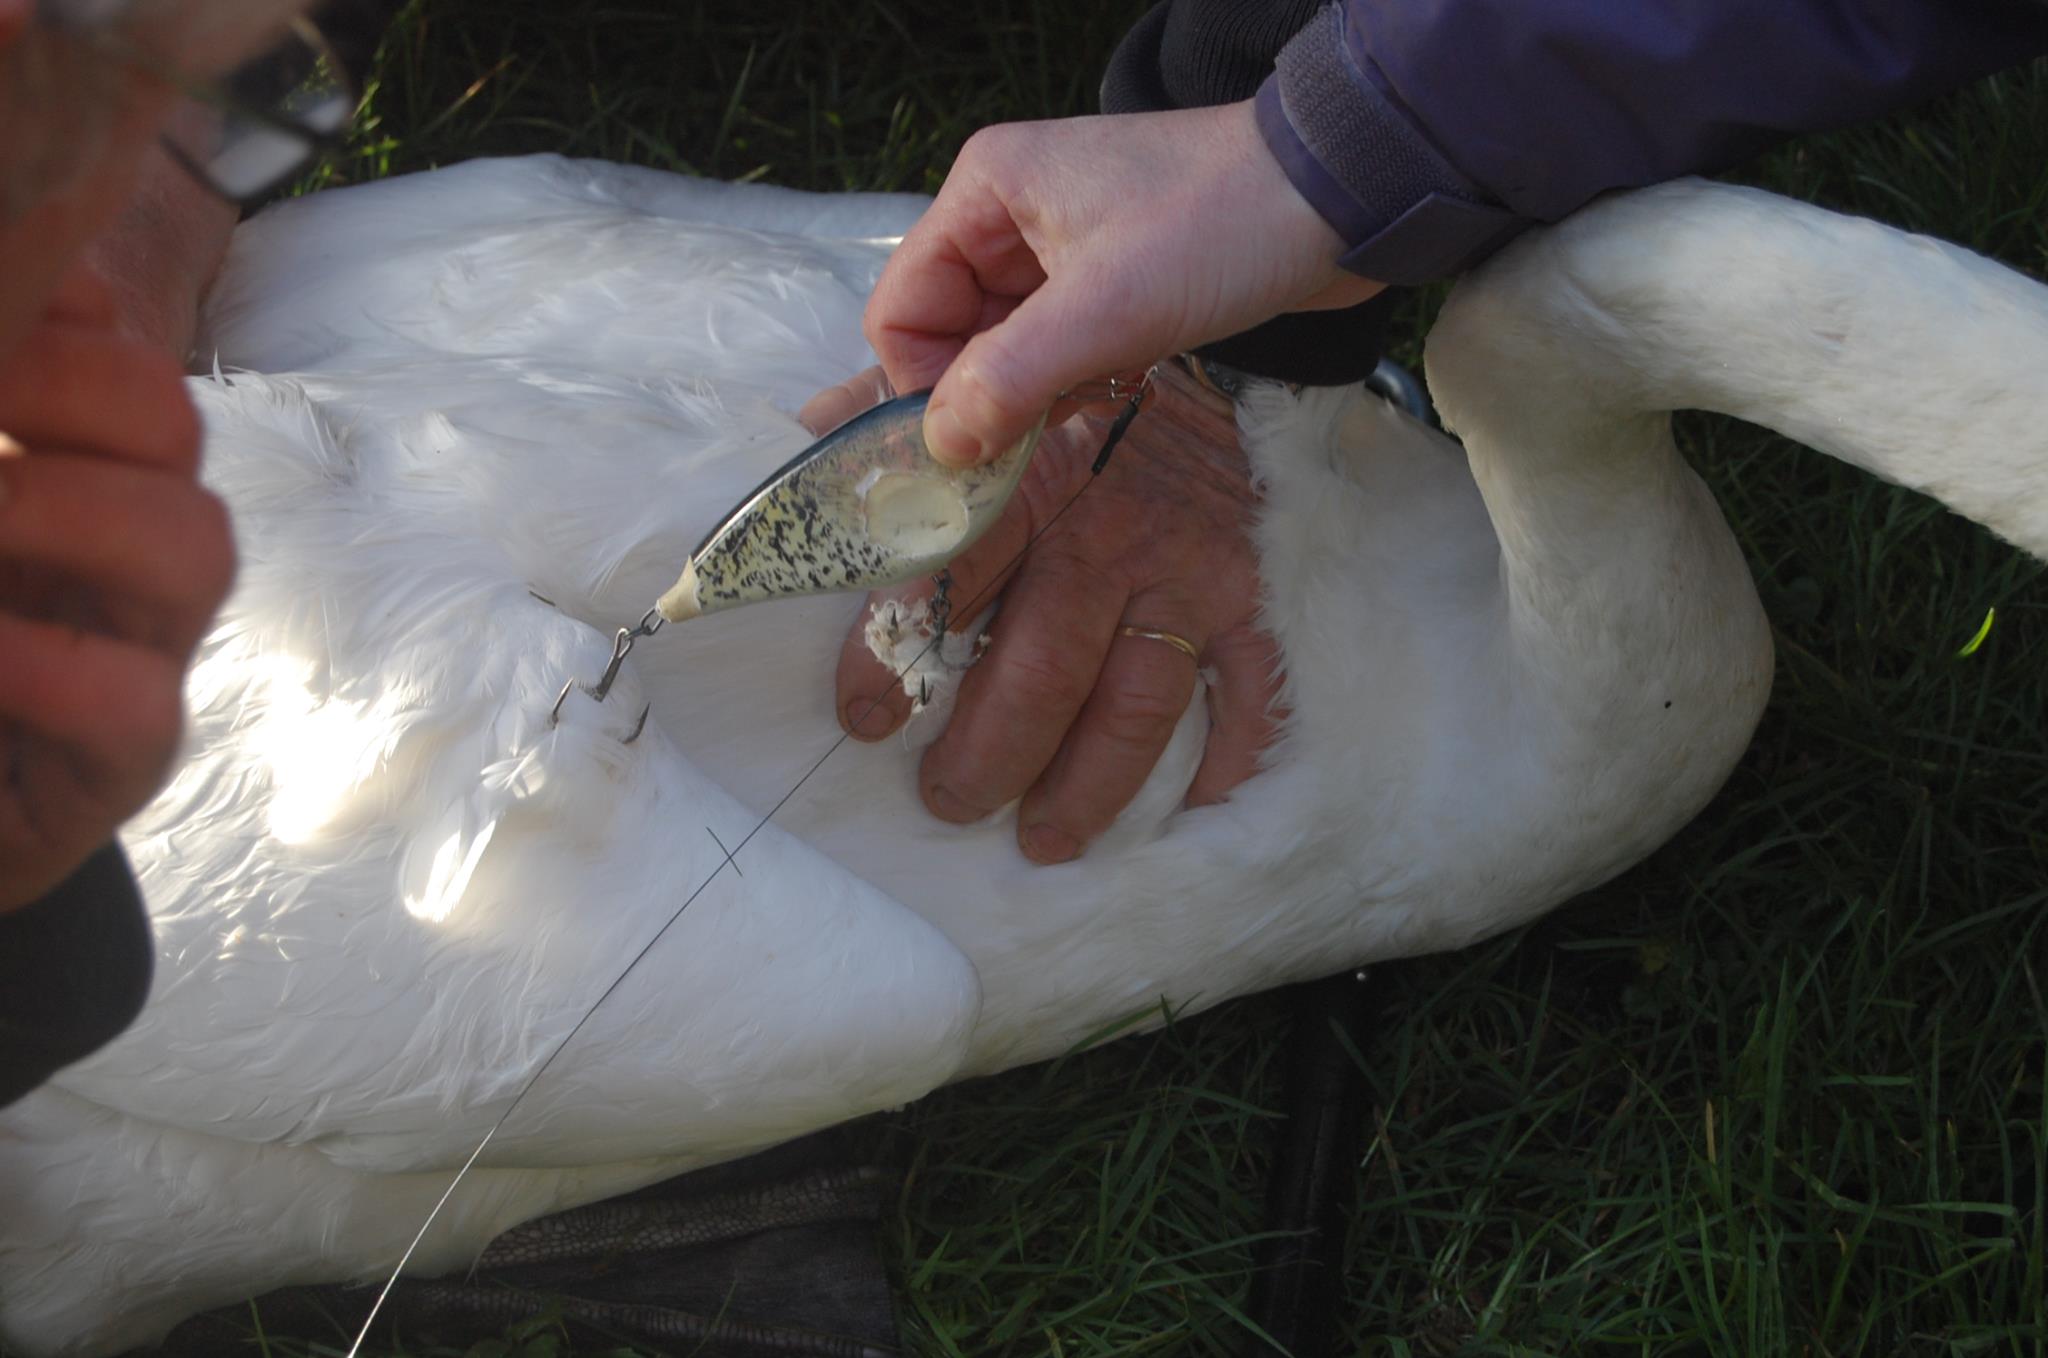 Swans Frequently Getting Tangled in Fishing Line, Officials Say